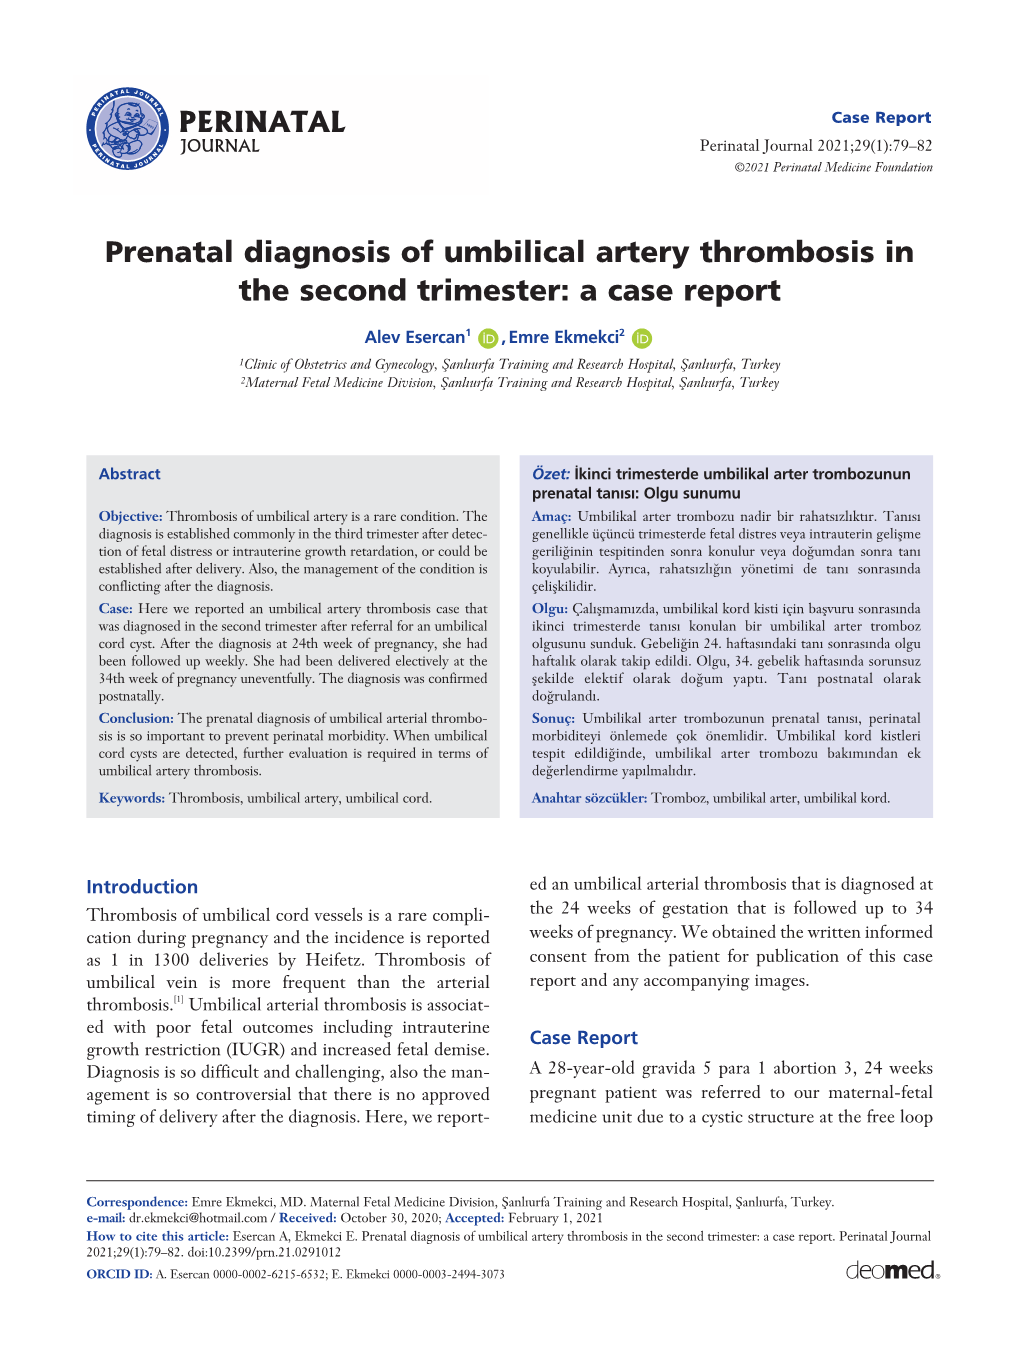 Prenatal Diagnosis of Umbilical Artery Thrombosis in the Second Trimester: a Case Report